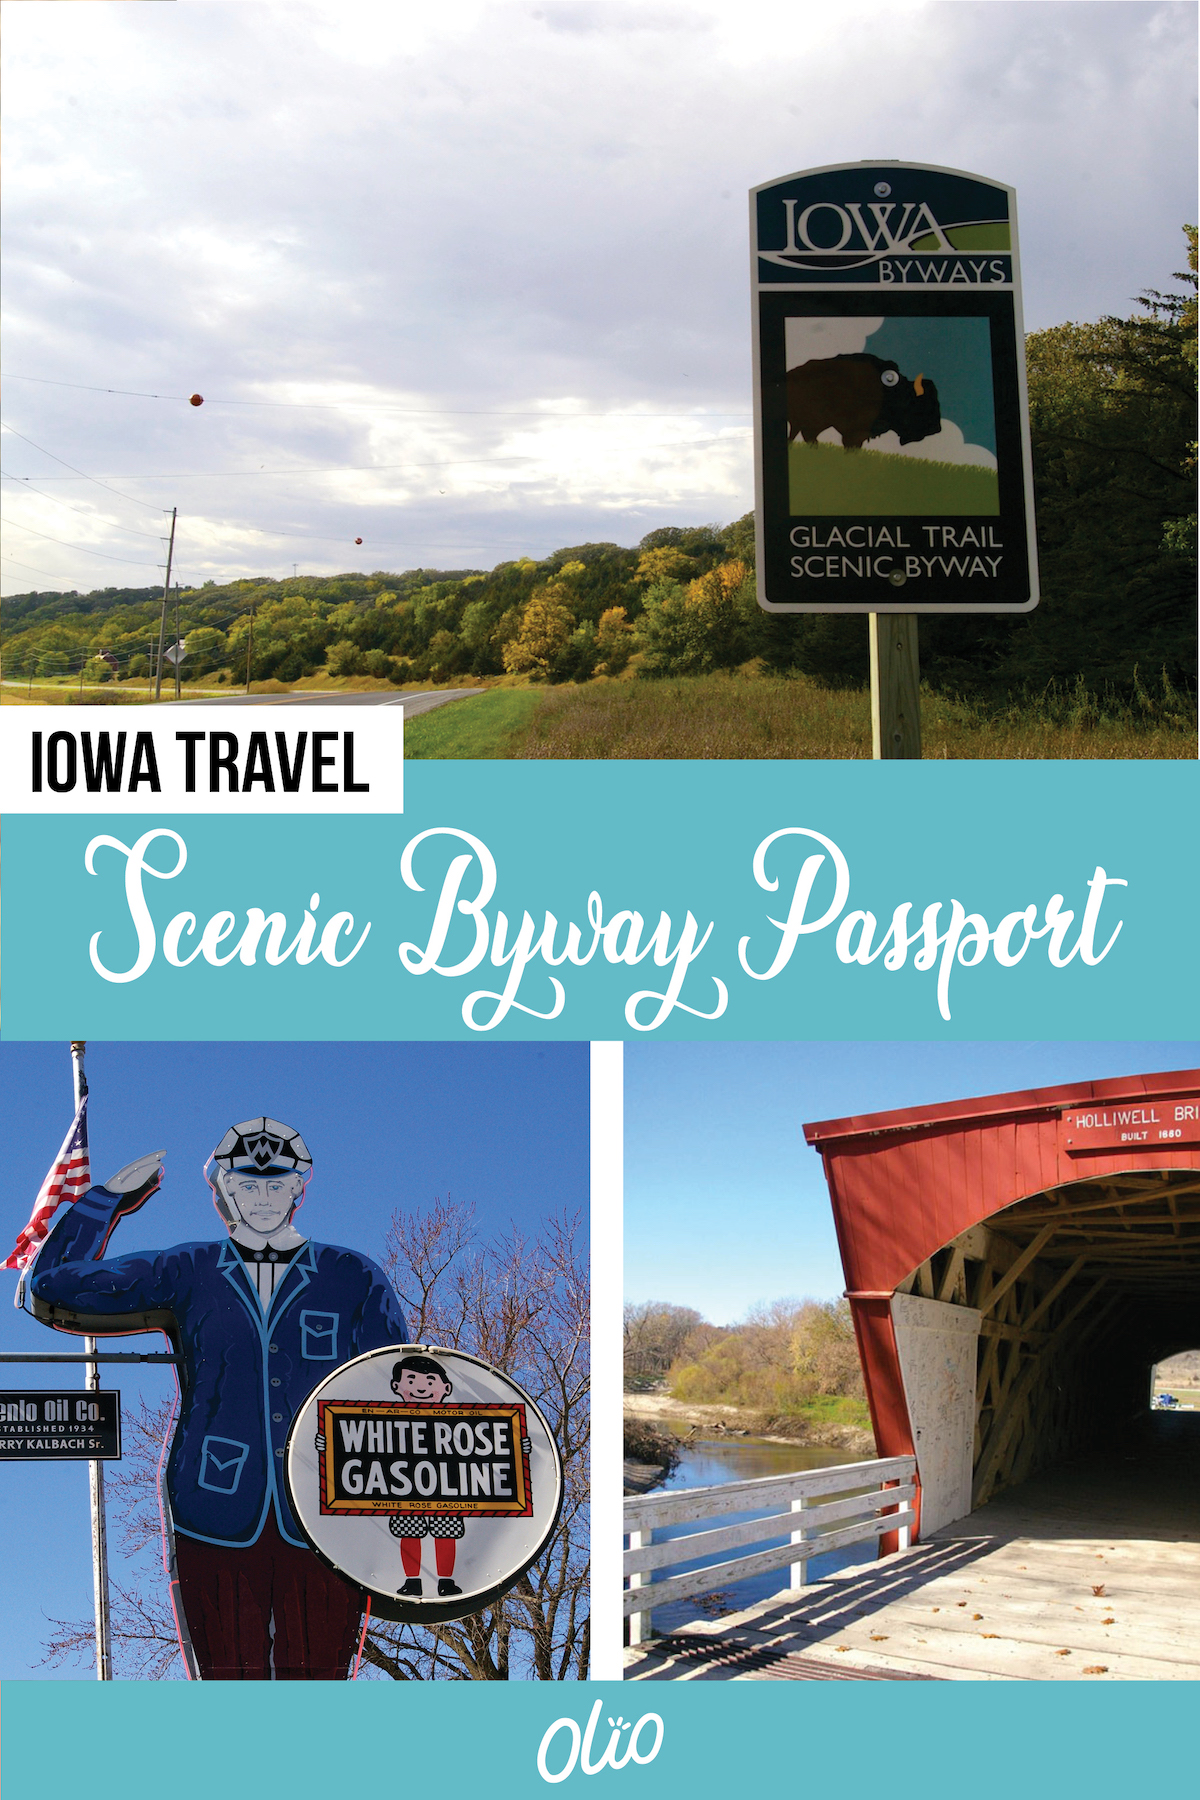 Looking for a road trip adventure? Choose one of Iowa’s beautiful scenic byways and hit the road! And now it’s easier than ever to find places to stop, attractions to explore and so much more thanks to the Iowa Scenic Byway Passport. This free digital passport is easy to use and offers tons of opportunities to discover new places across the state. Learn more about how to get a passport of your own and discover some of the beautiful scenic byways you can explore yourself. #ThisIsIowa @IowaTourism